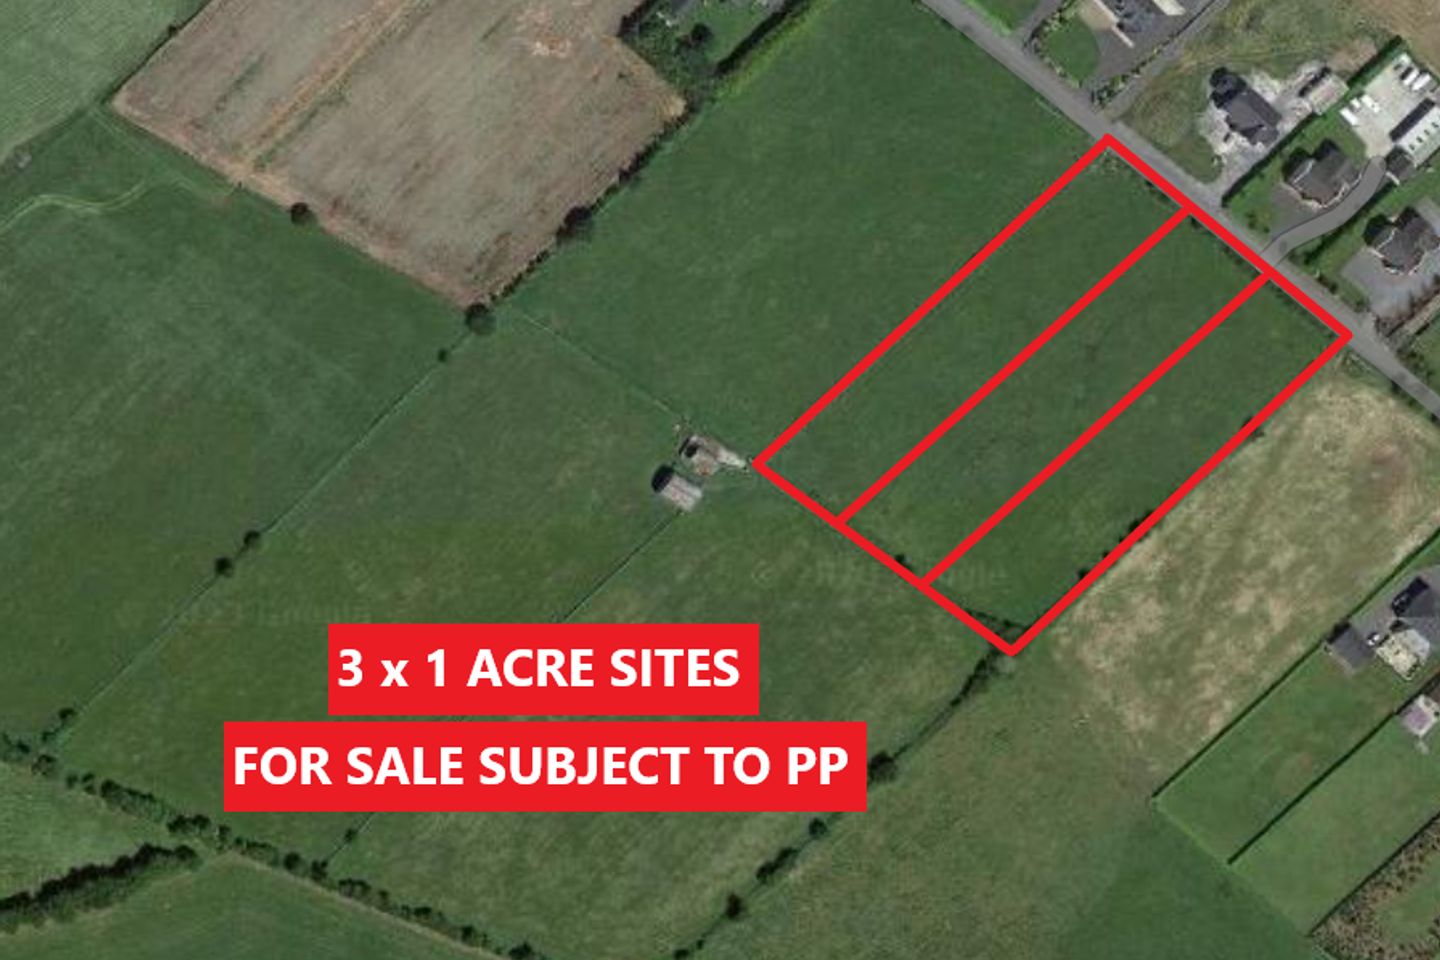 Sites For Sale (Subject to PP), at Lisheenavalla, Claregalway, Co. Galway